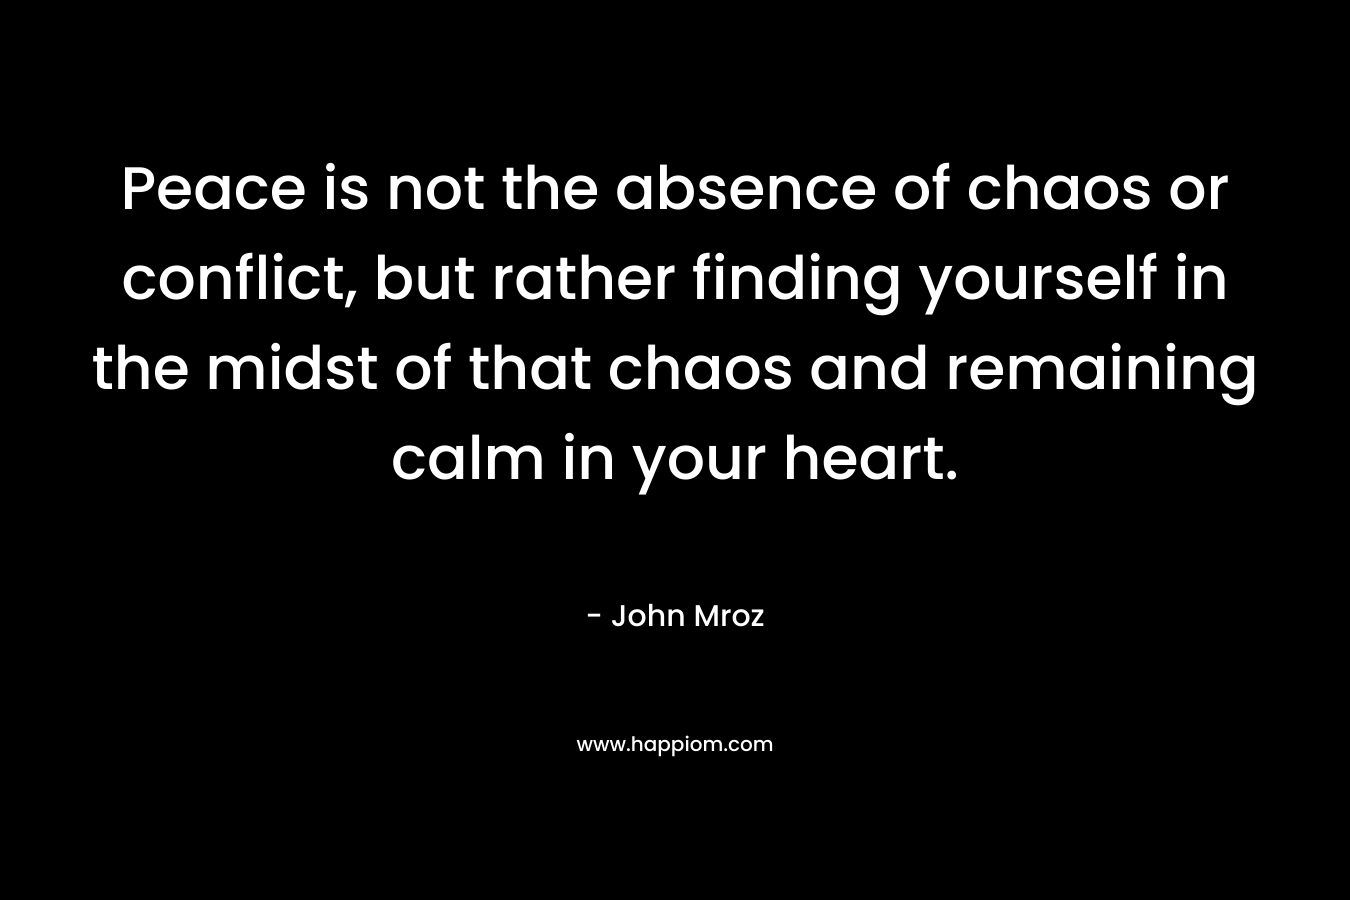 Peace is not the absence of chaos or conflict, but rather finding yourself in the midst of that chaos and remaining calm in your heart.